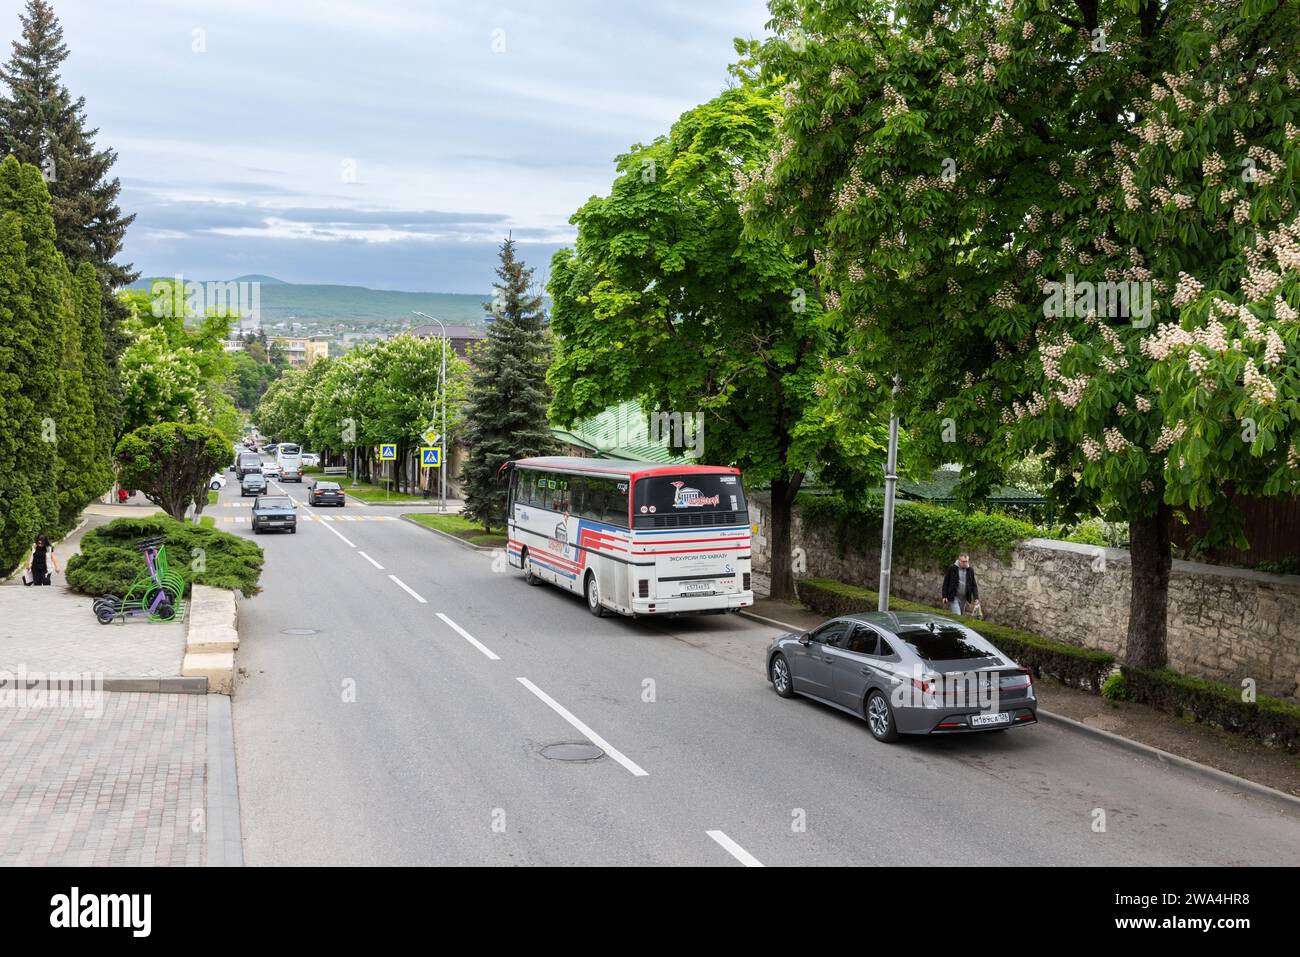 Pyatigorsk, Russia - May 12, 2023: Street view with parked tourist bus, ordinary people walk the street Stock Photo